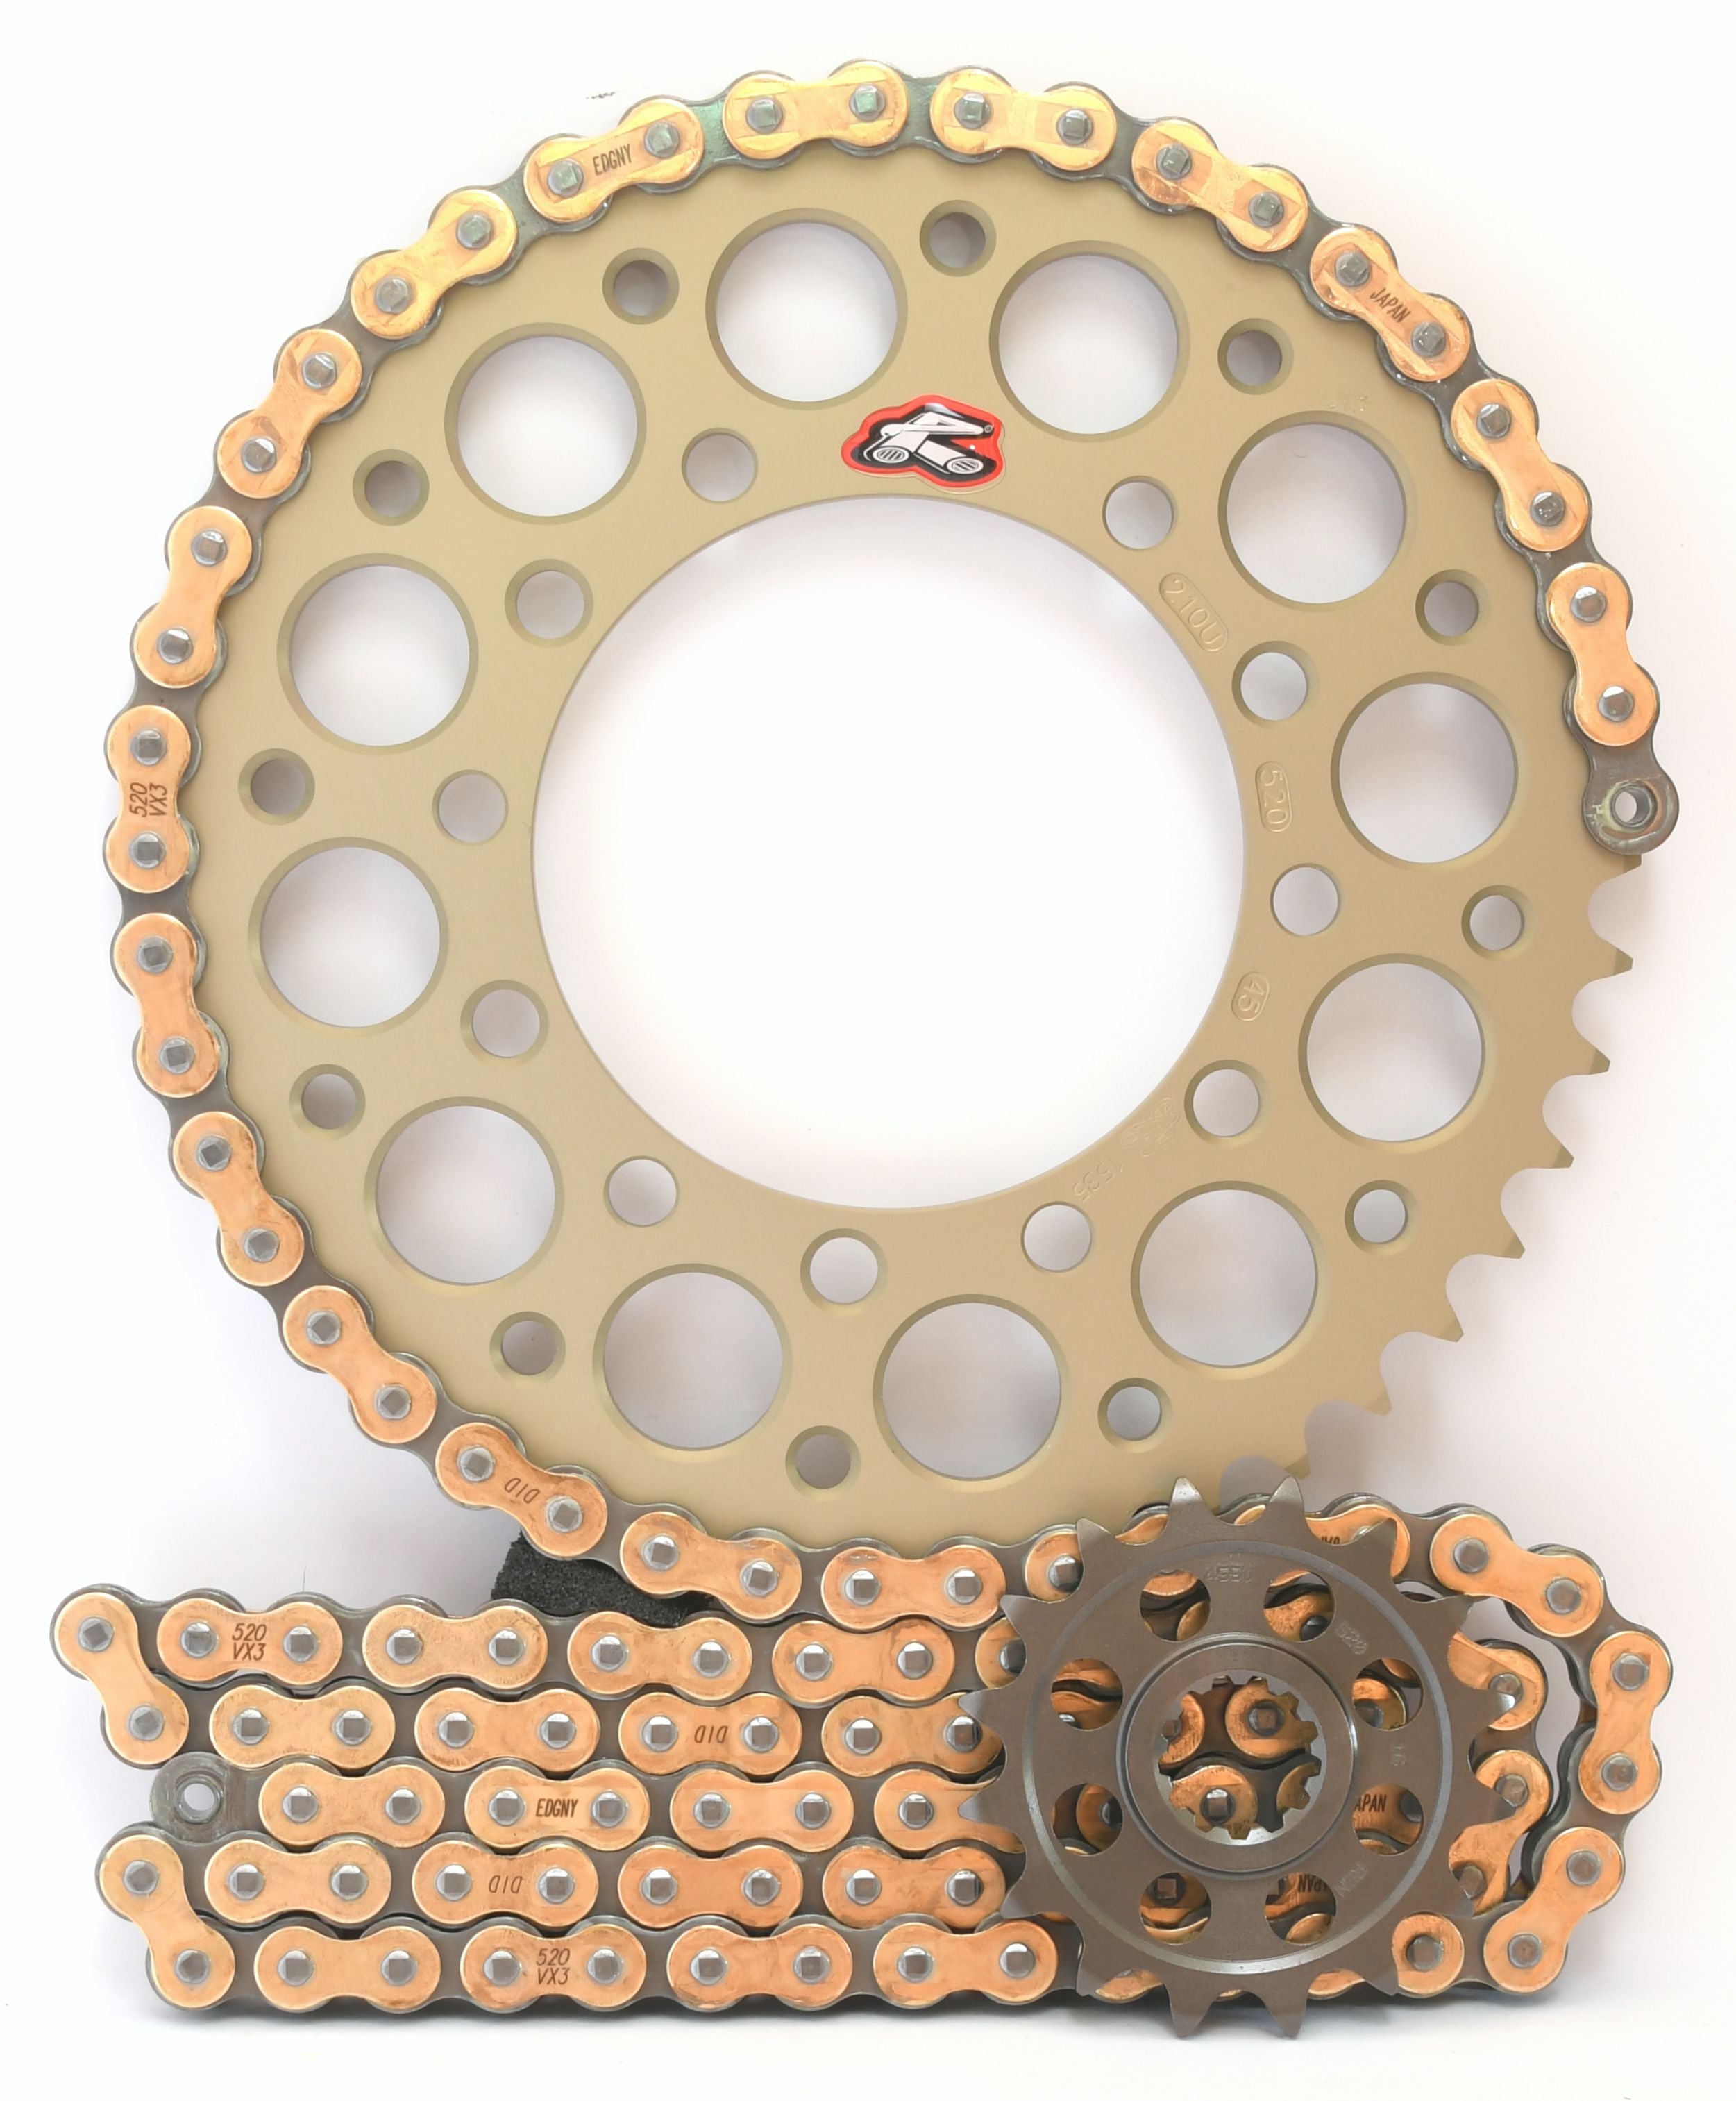 Renthal Ultralight and DID 520 Conversion Chain & Sprocket Kit for Suzuki GSX-R1000 2001-2008 - Choose Your Gearing